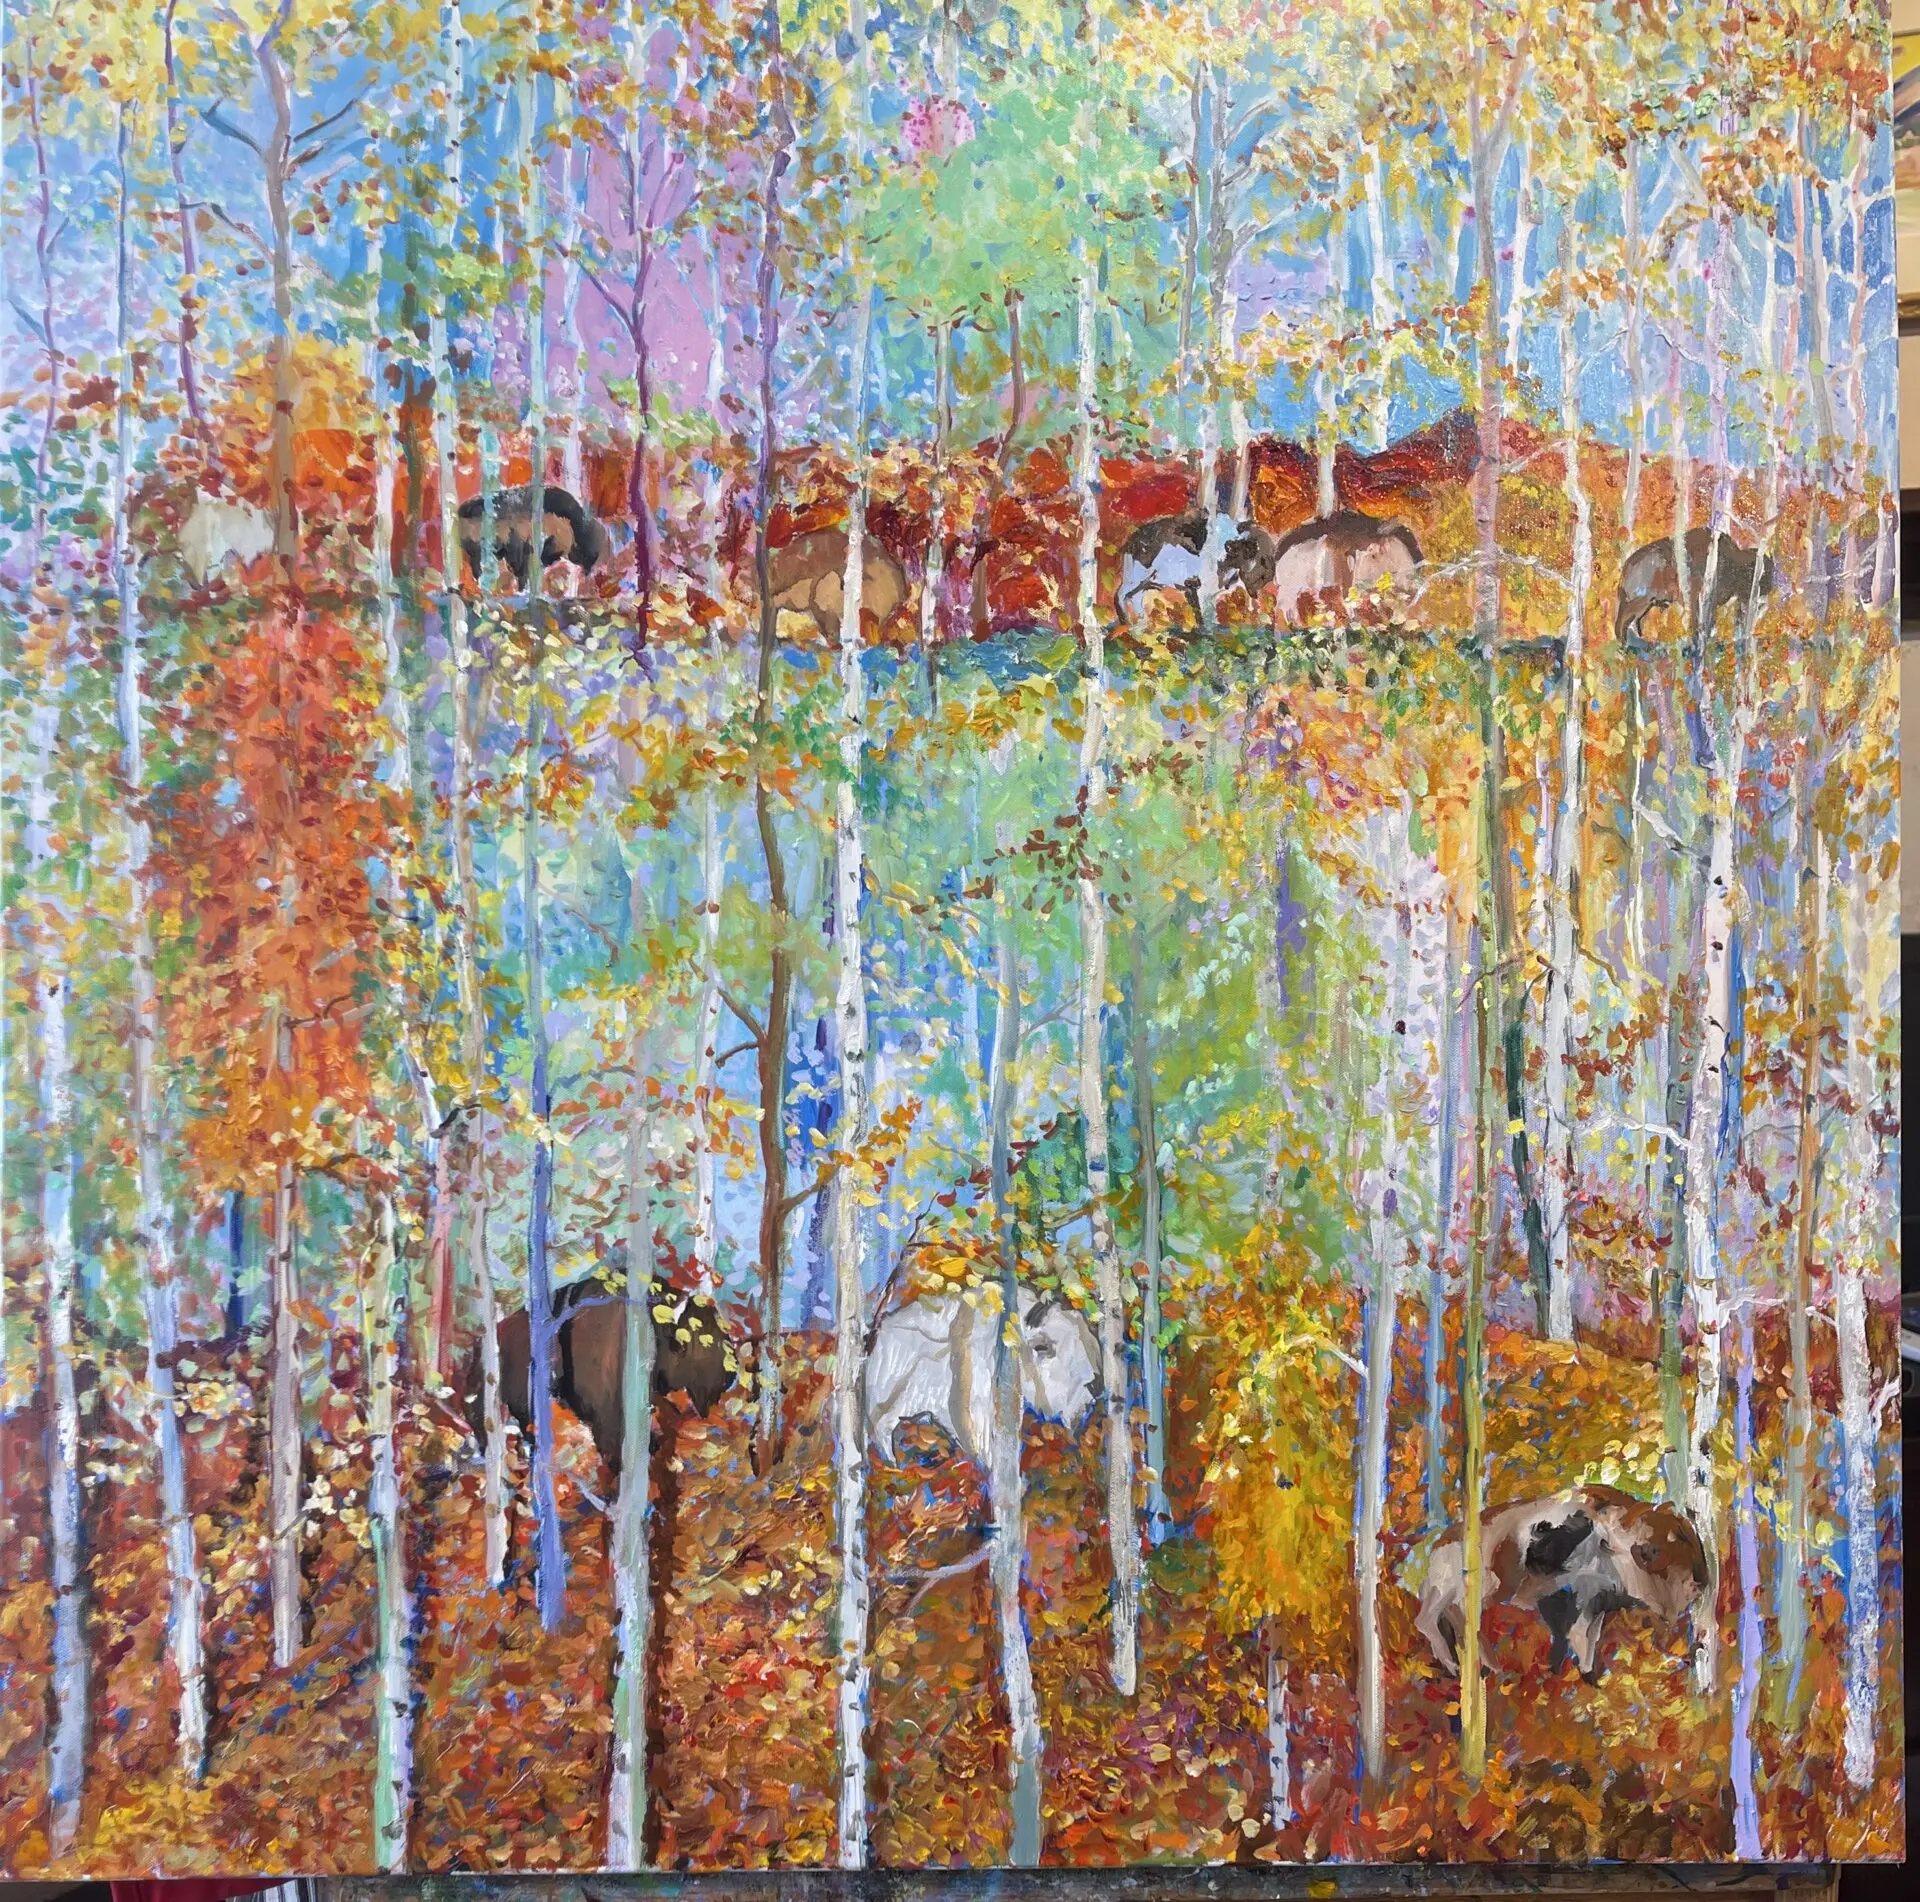 Life Beneath The Aspens Oil Painting available for sale